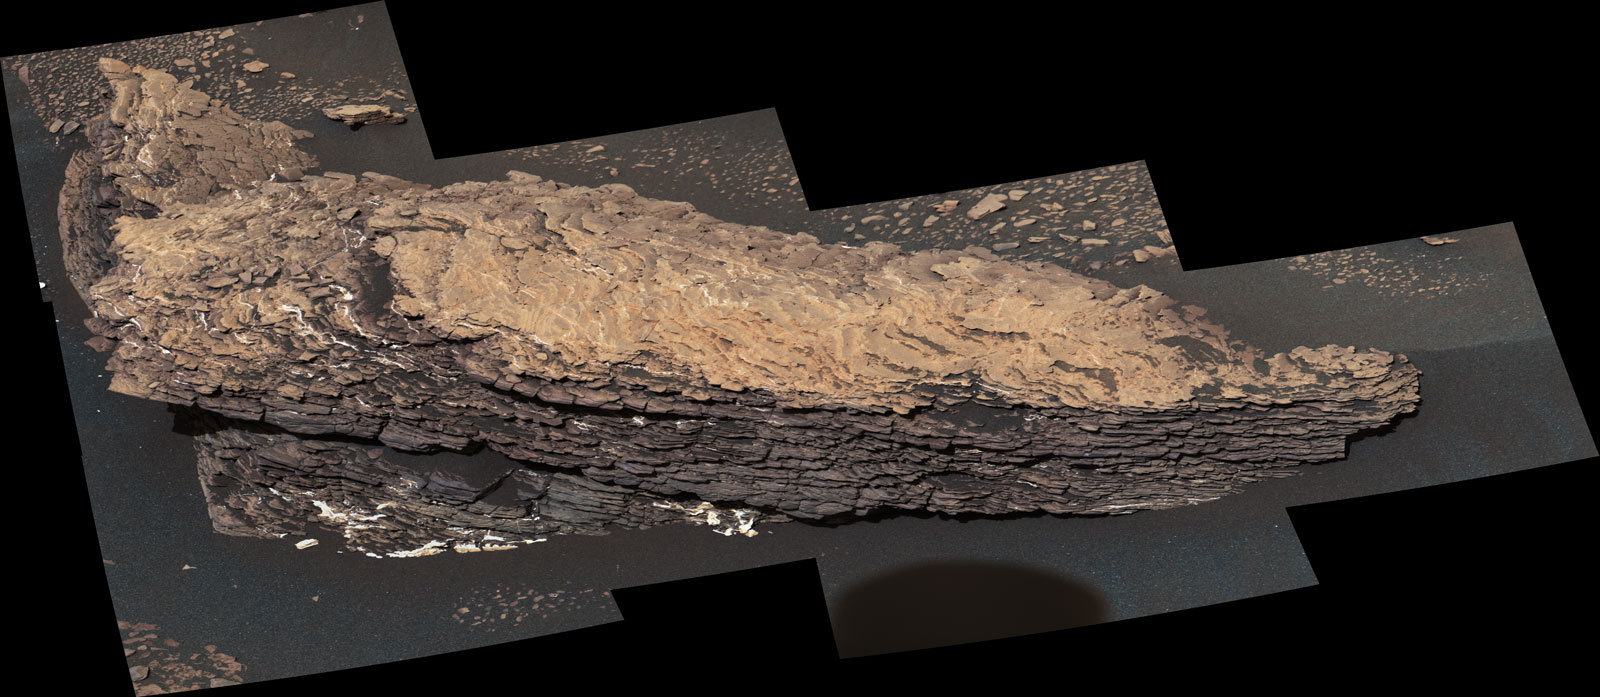 This mosaic of images shows a boulder-sized rock called "Strathdon," which is made up of many complex layers. NASA's Curiosity Mars rover took these images using its Mast Camera, or Mastcam, on July 9, 2019, the 2,461st Martian sol, or day, of the mission.